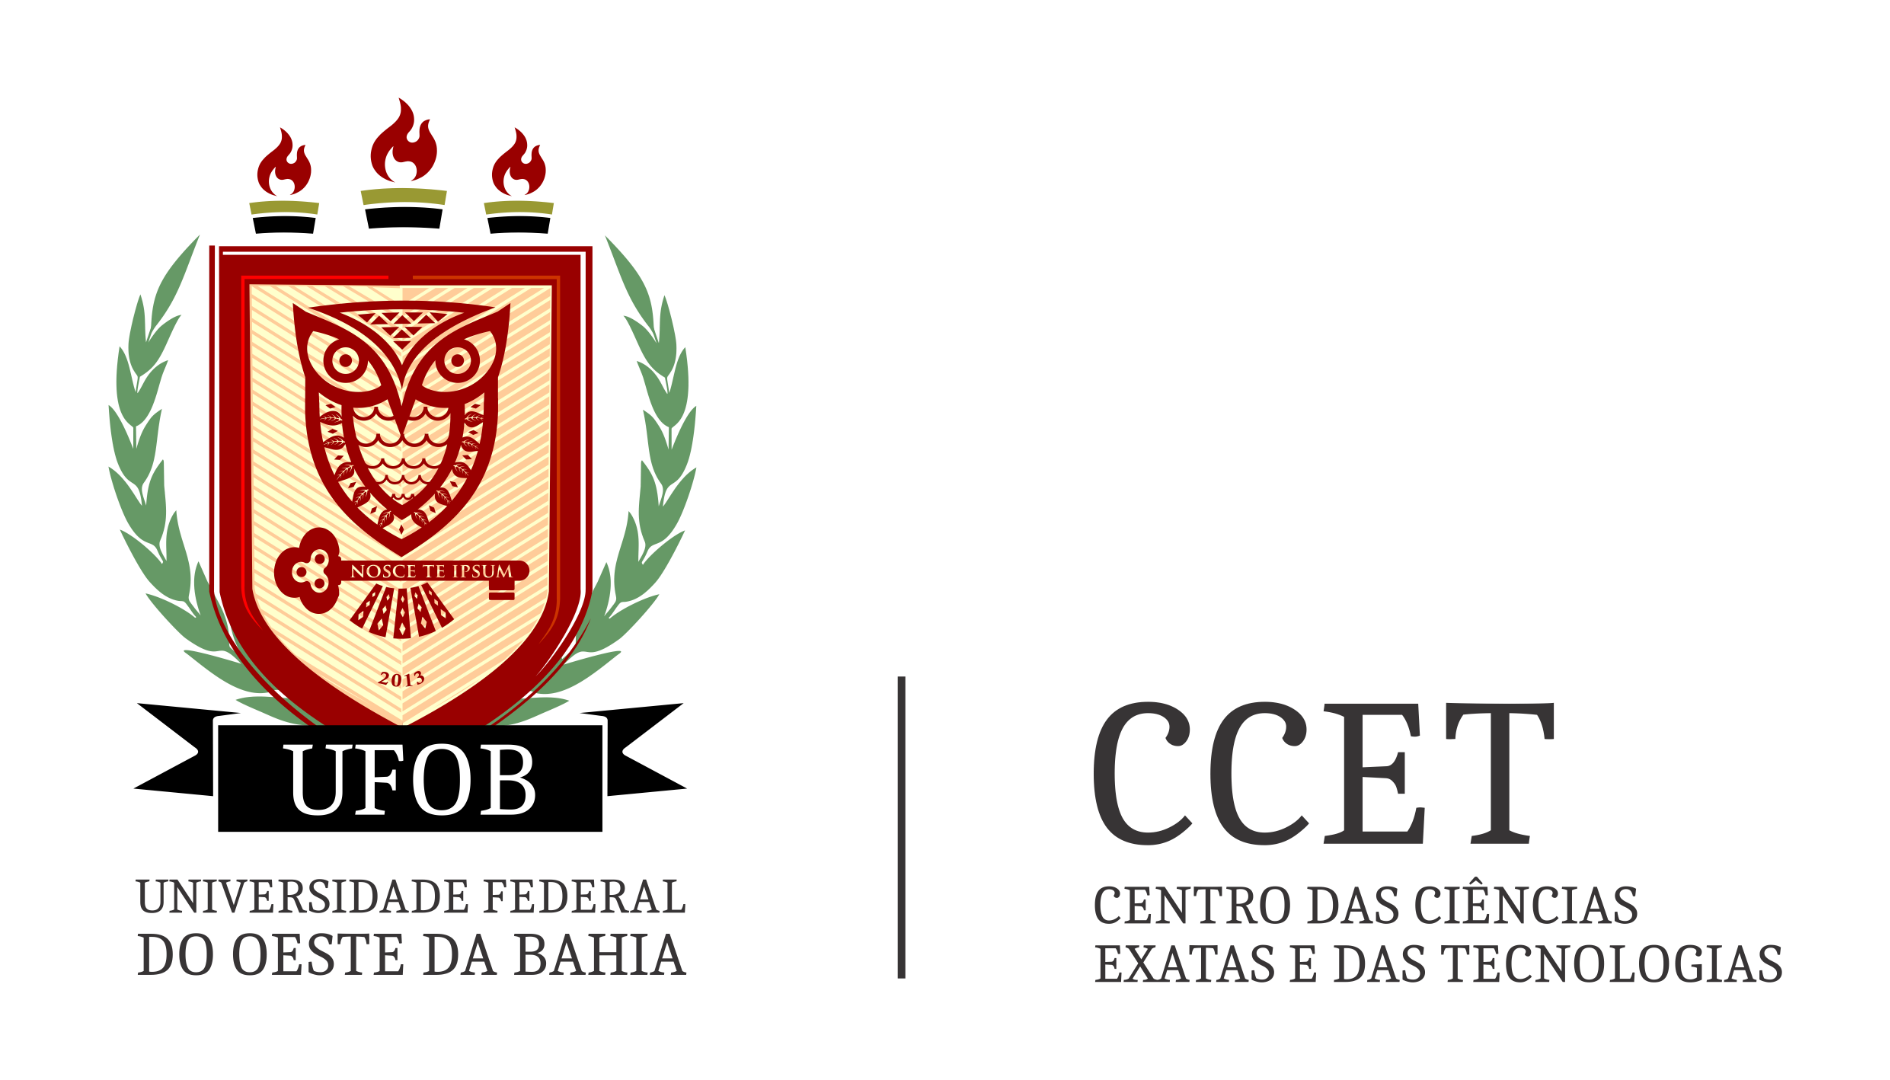 CCET_BRASAO.png